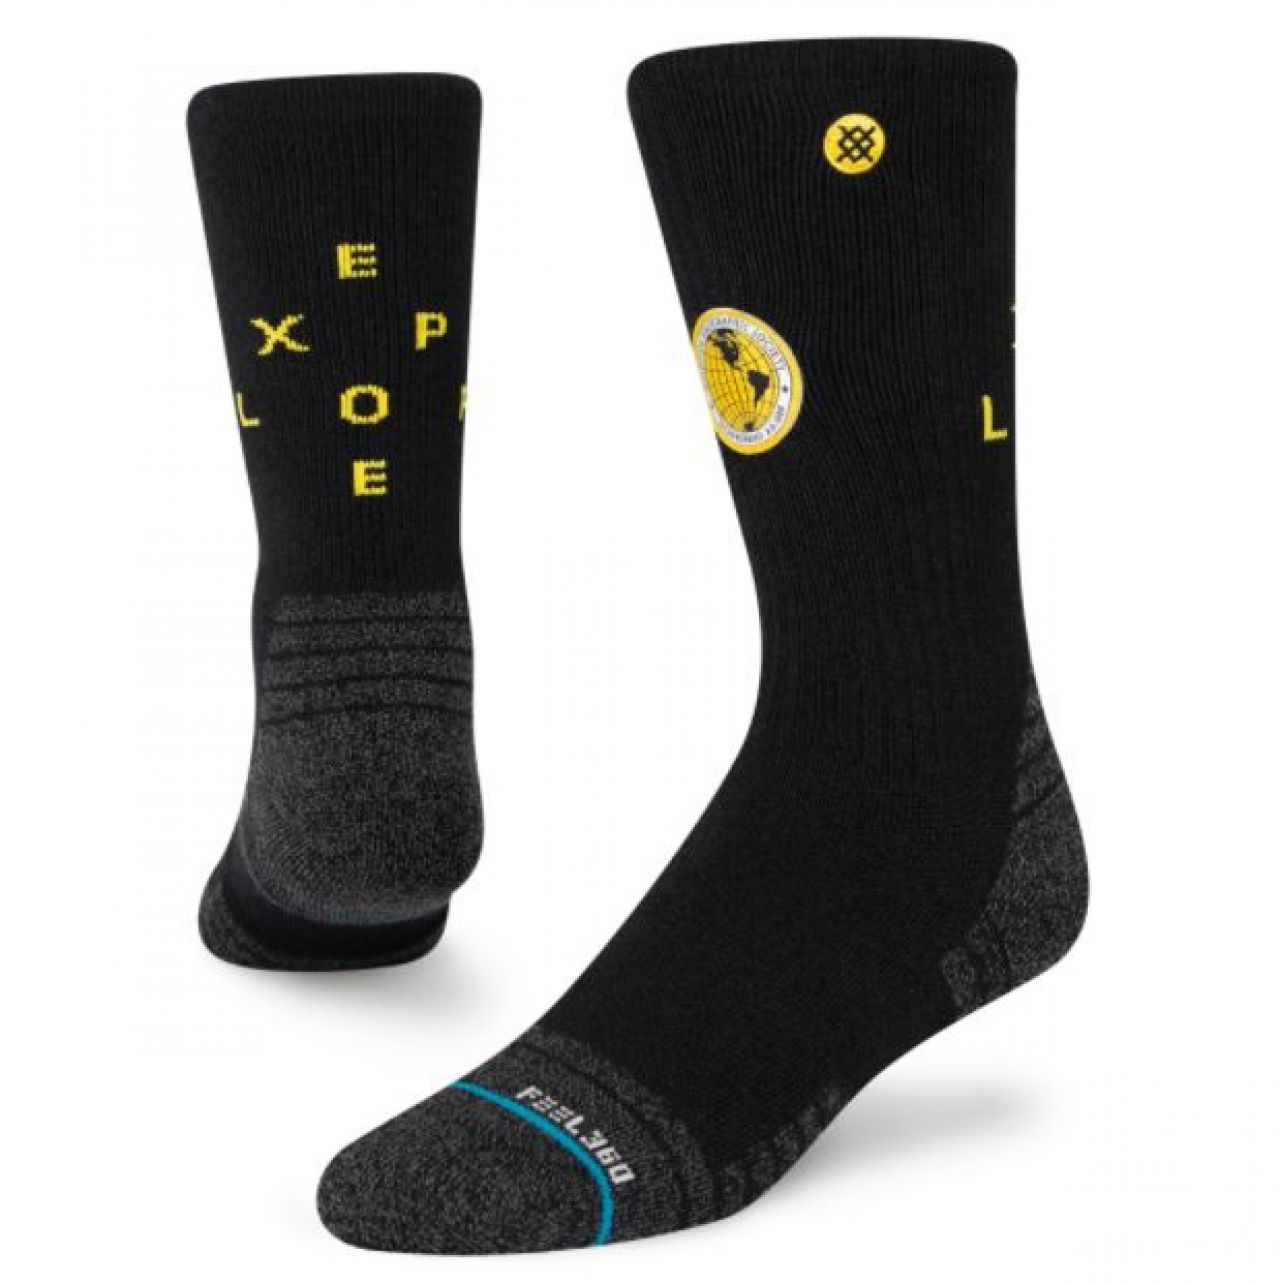 STANCE CHAUSSETTES EXPLORATION x NATIONAL GEOGRAPHIC Chaussettes de running